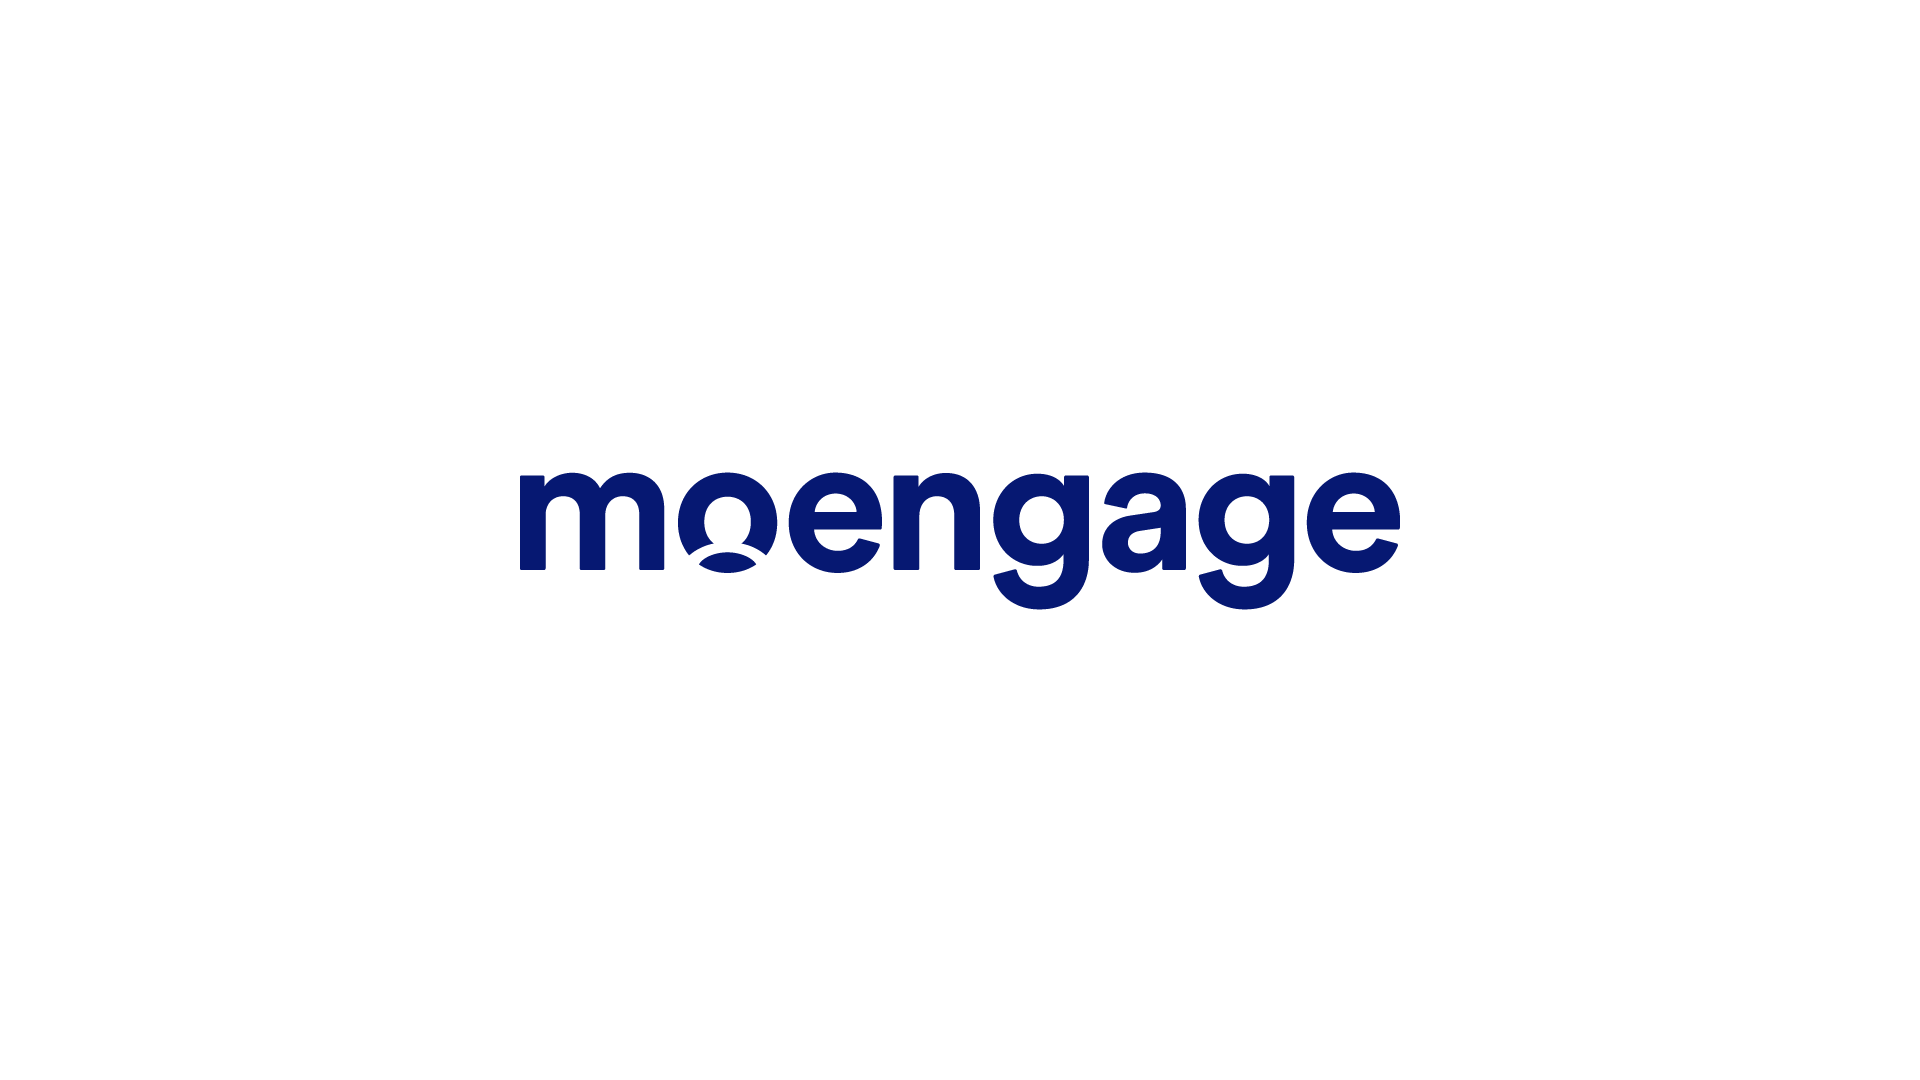 In Partnership with MoEngage